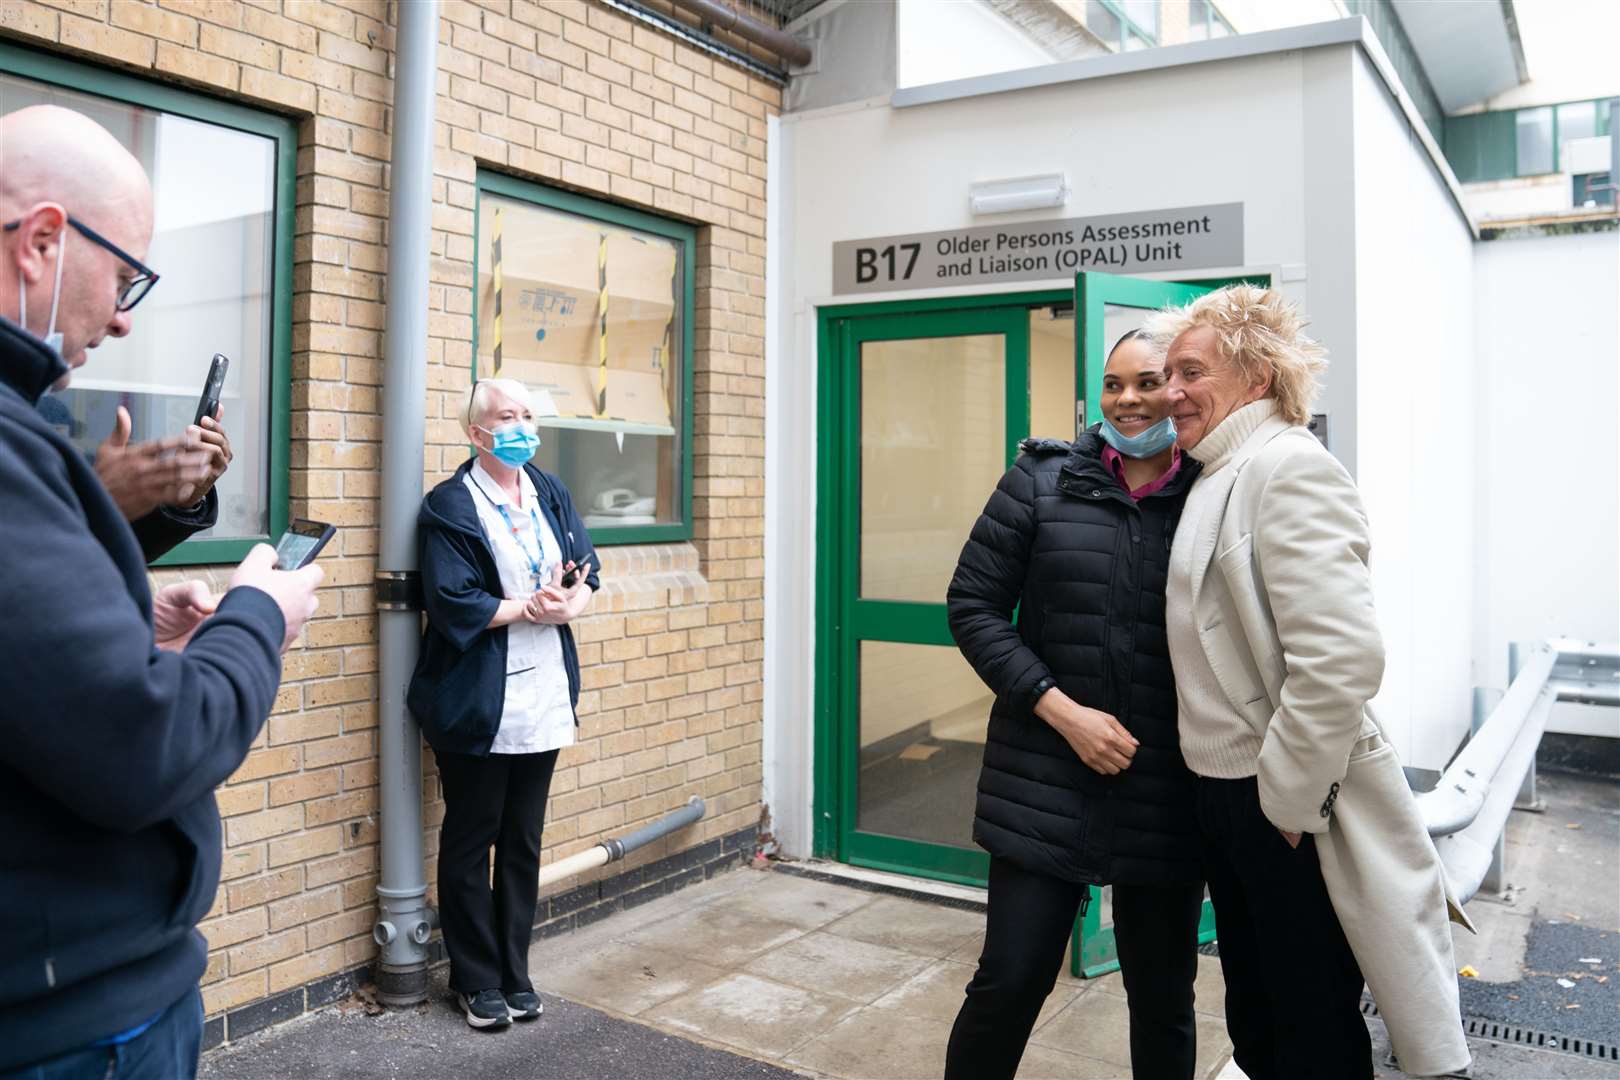 Sir Rod Stewart poses for photos with members of staff at the Princess Alexandra Hospital in Harlow (Joe Giddens/PA)